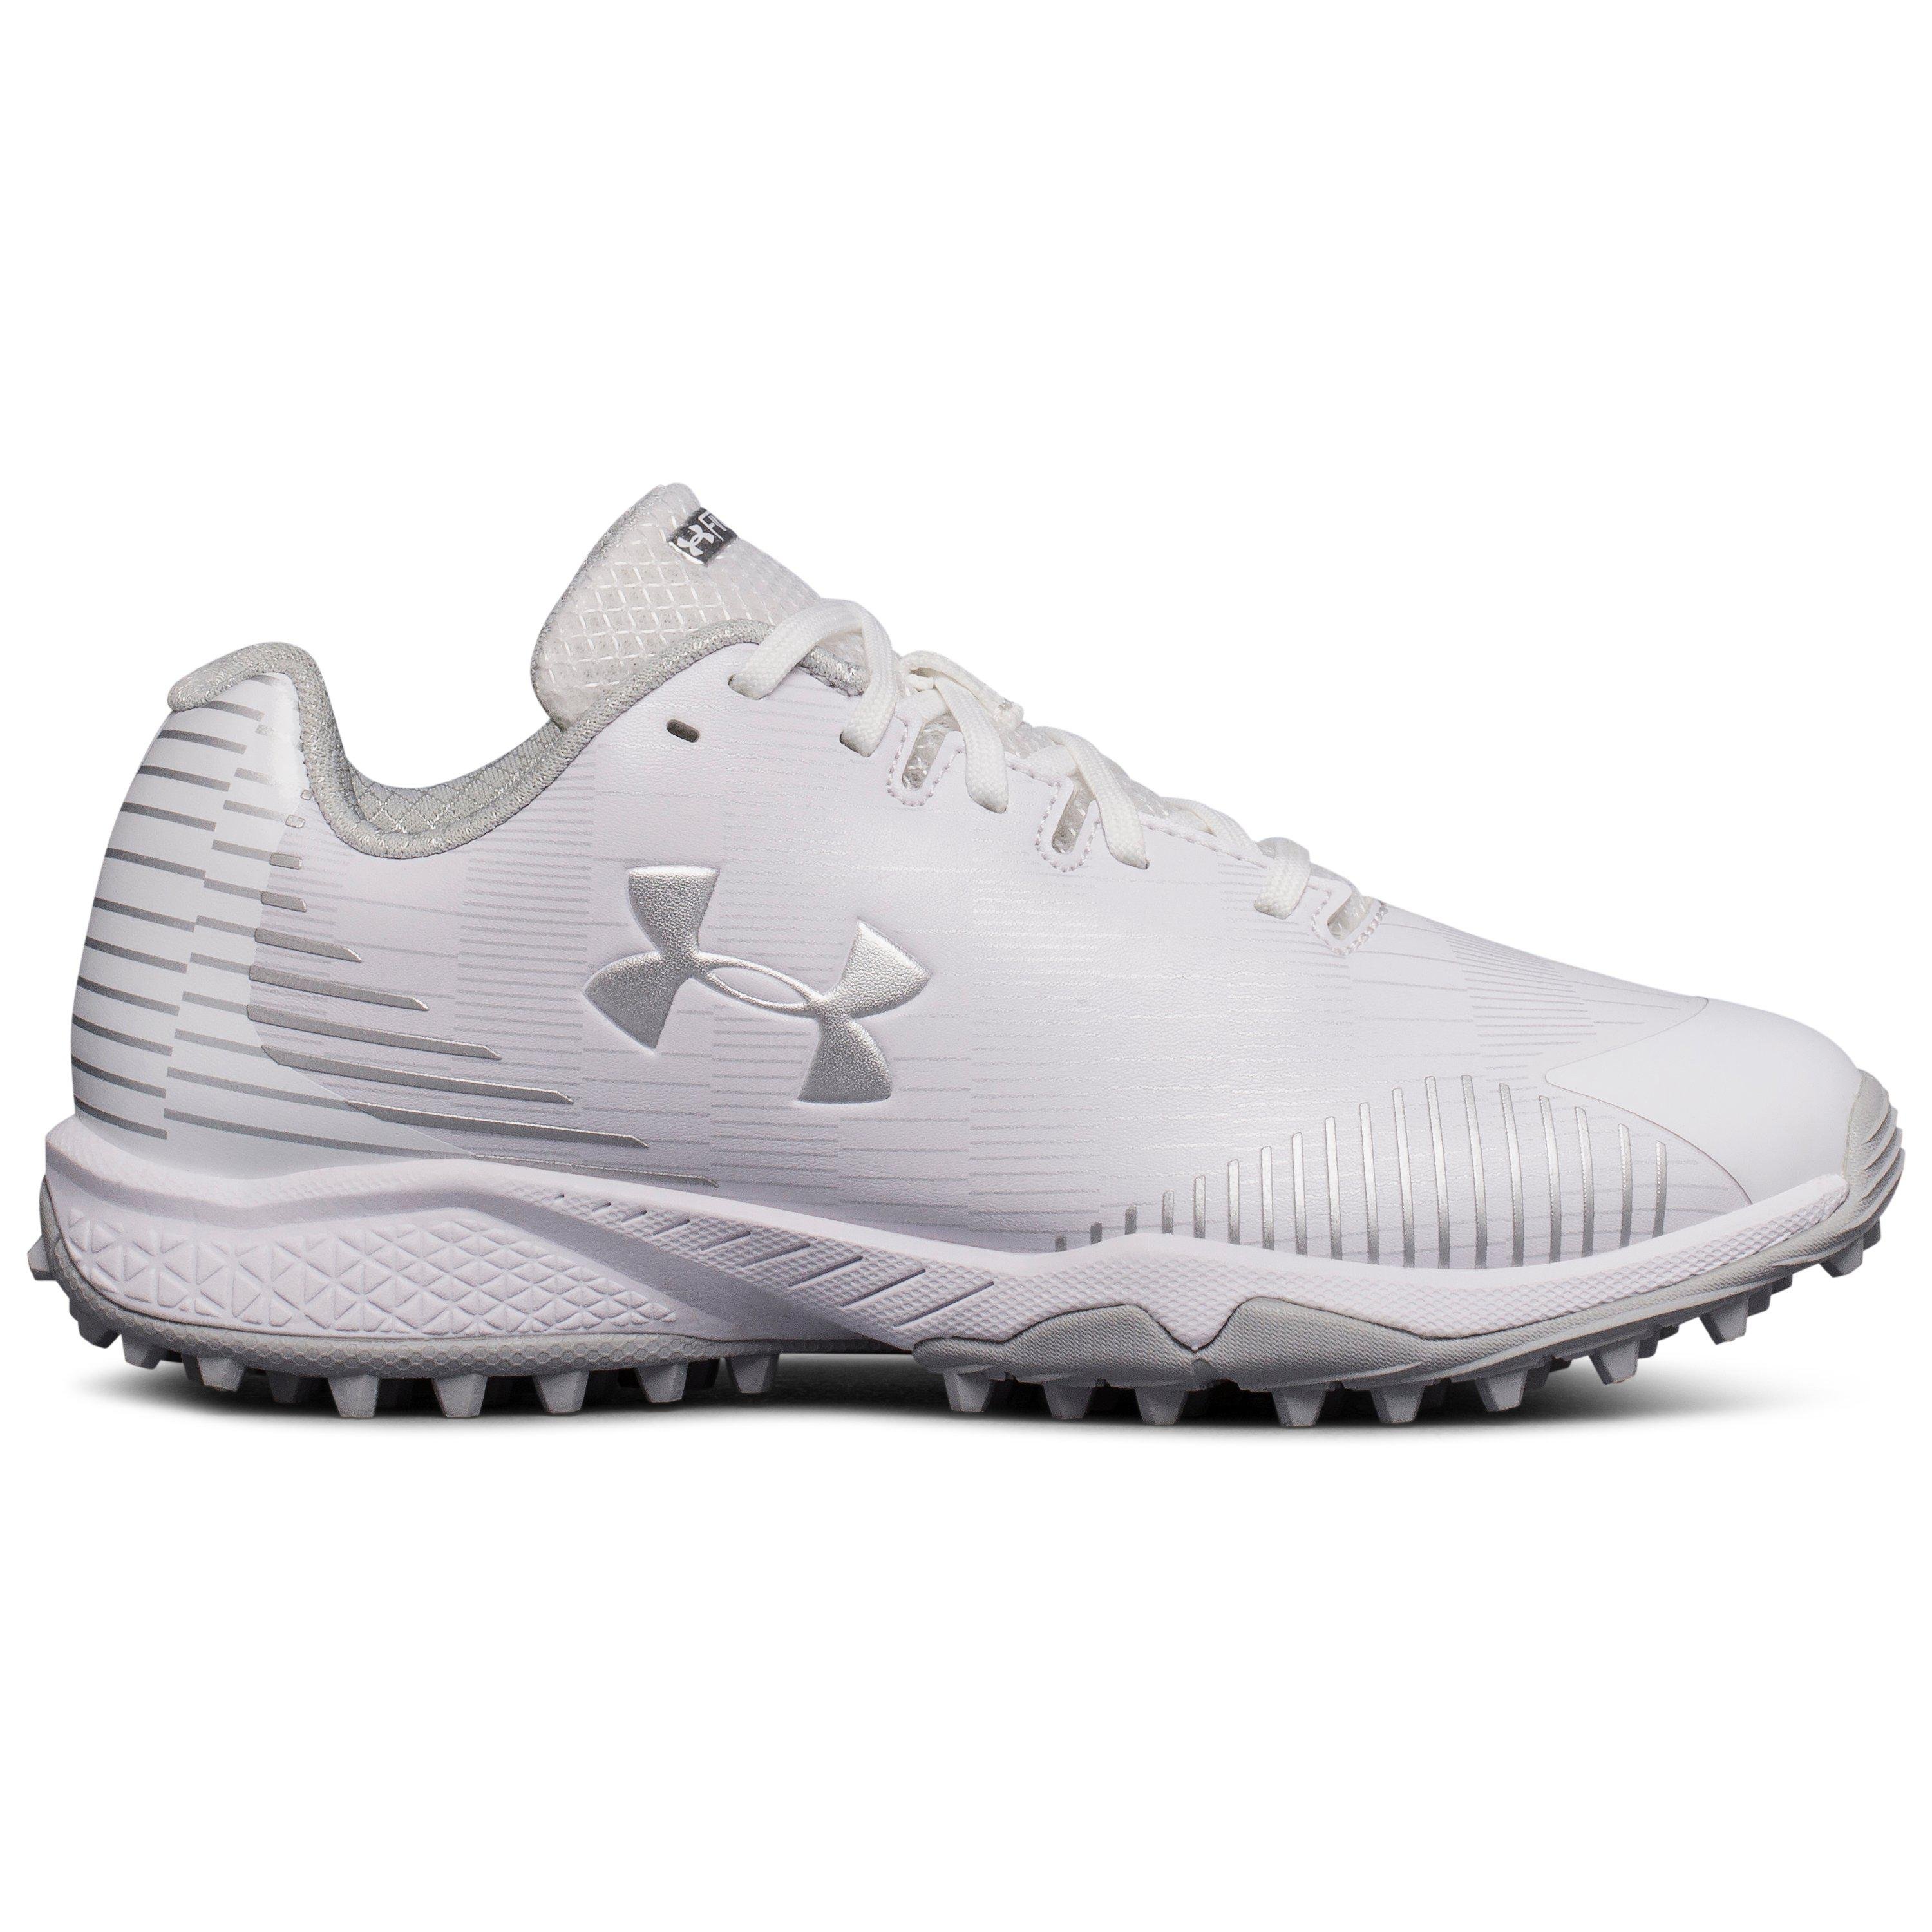 Black Size 7.5 M New Womens Under Armour Finisher Lacrosse Turf Shoes White 